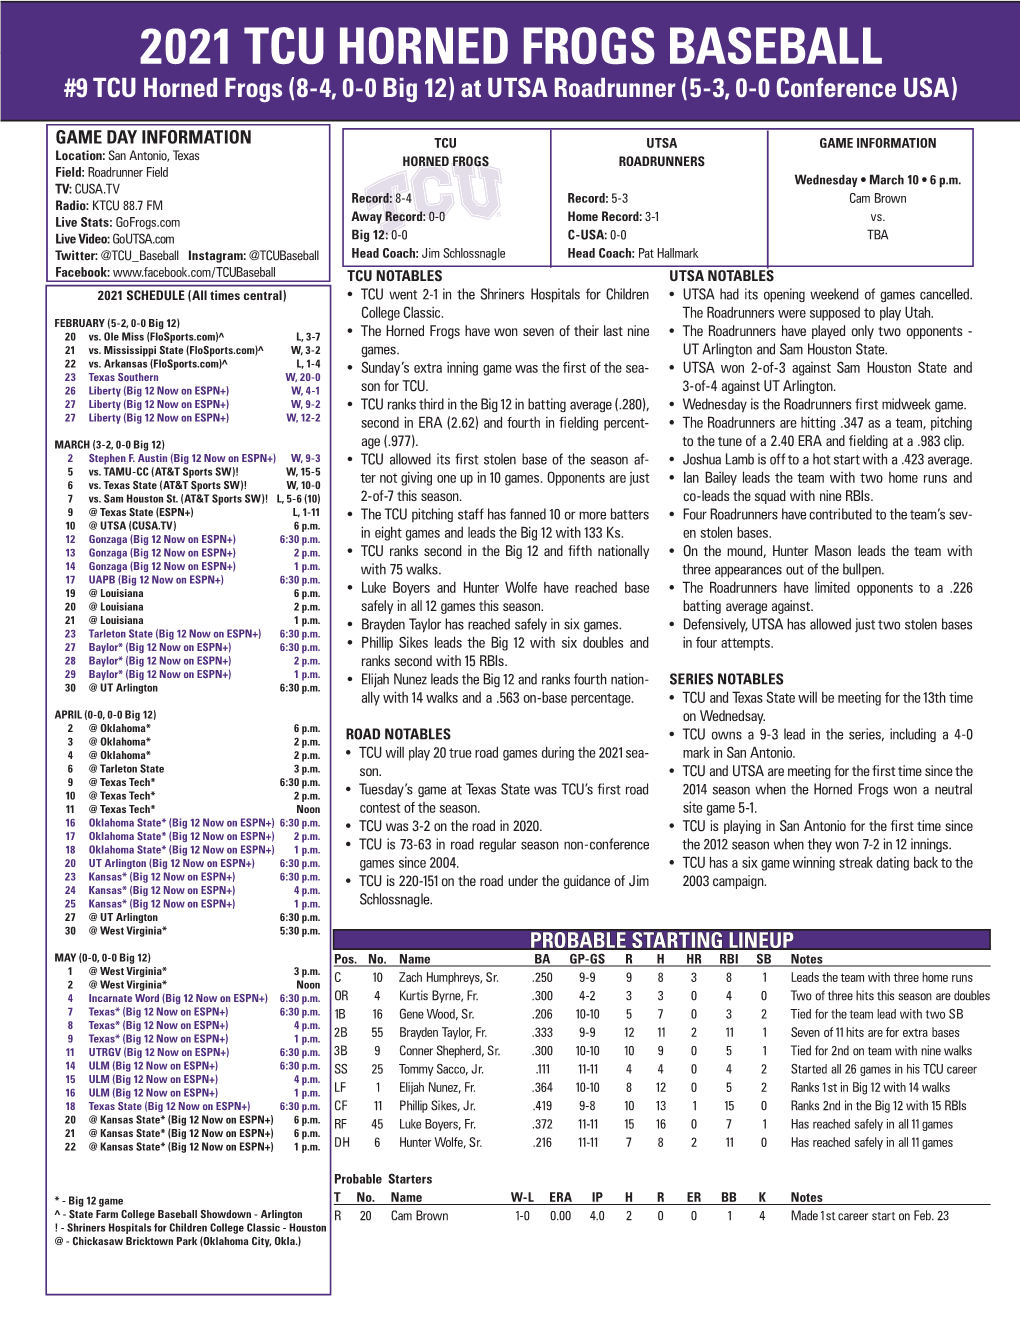 2021 TCU Horned Frogs Baseball Overall Statistics for TCU (As of Mar 09, 2021) (All Games Sorted by Batting Avg)